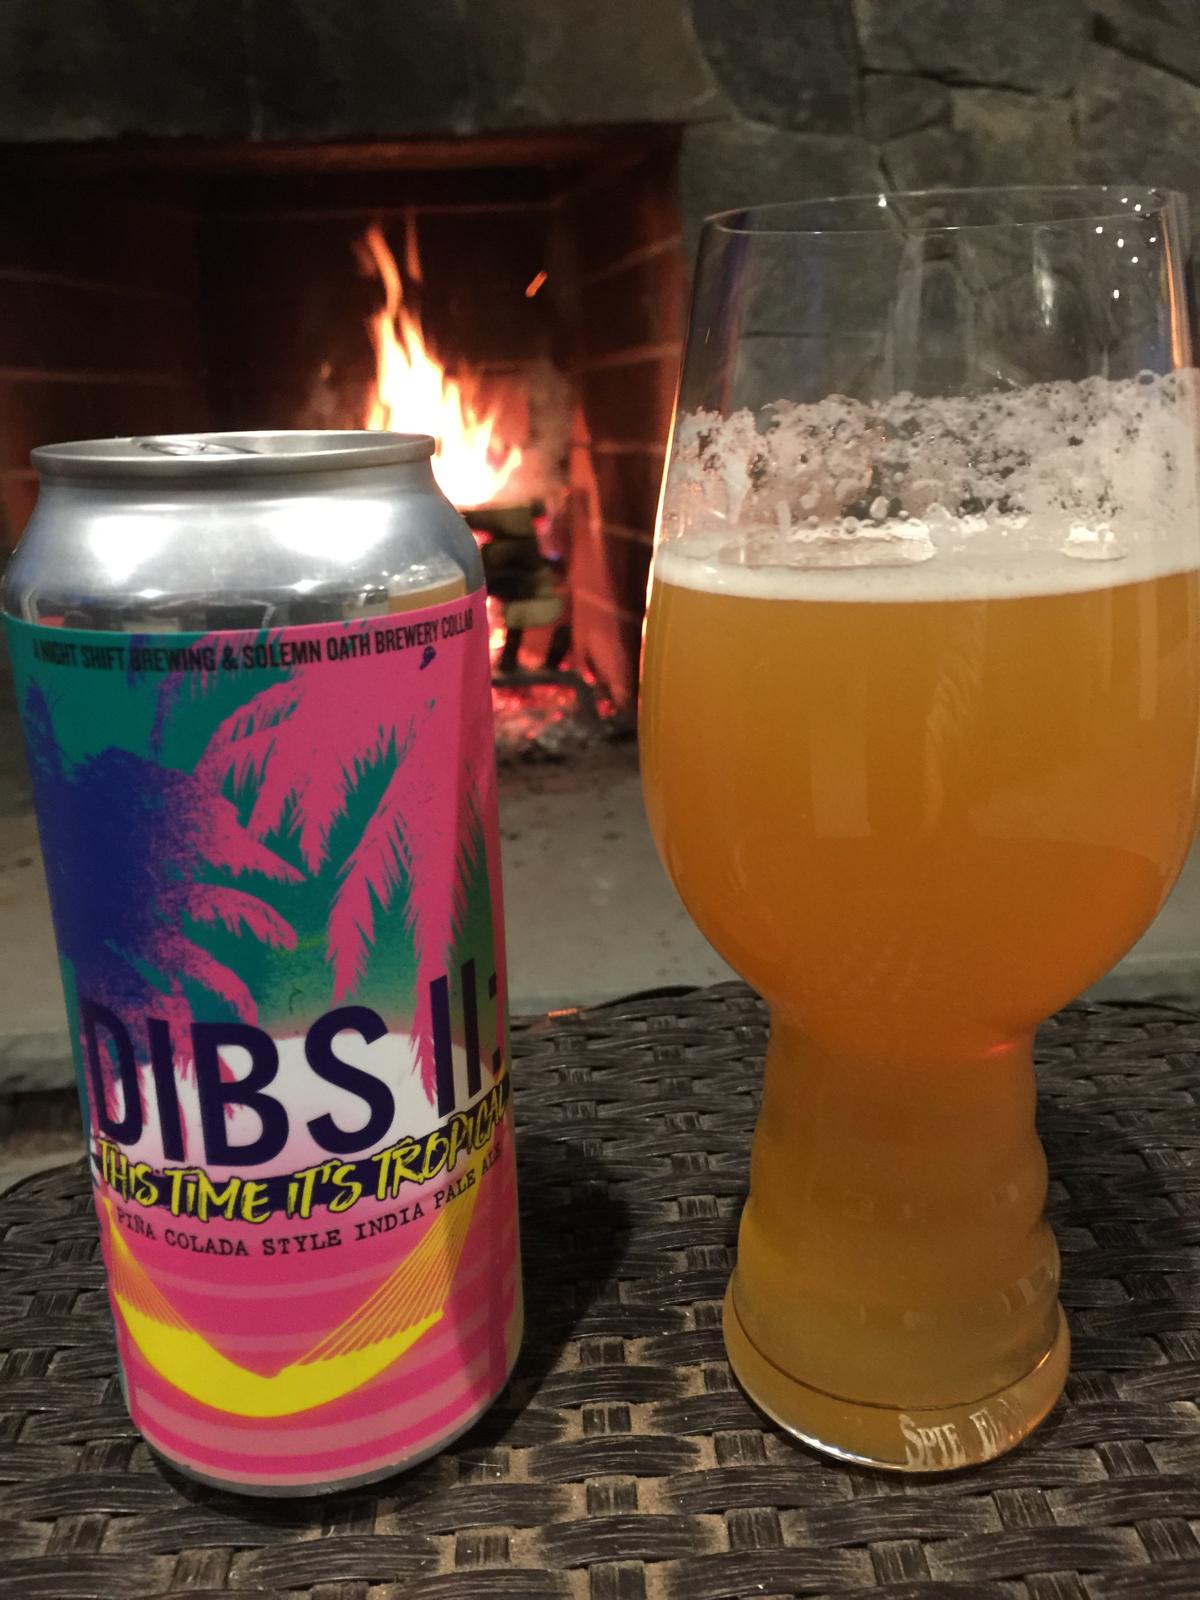 Dibs II: This Time It